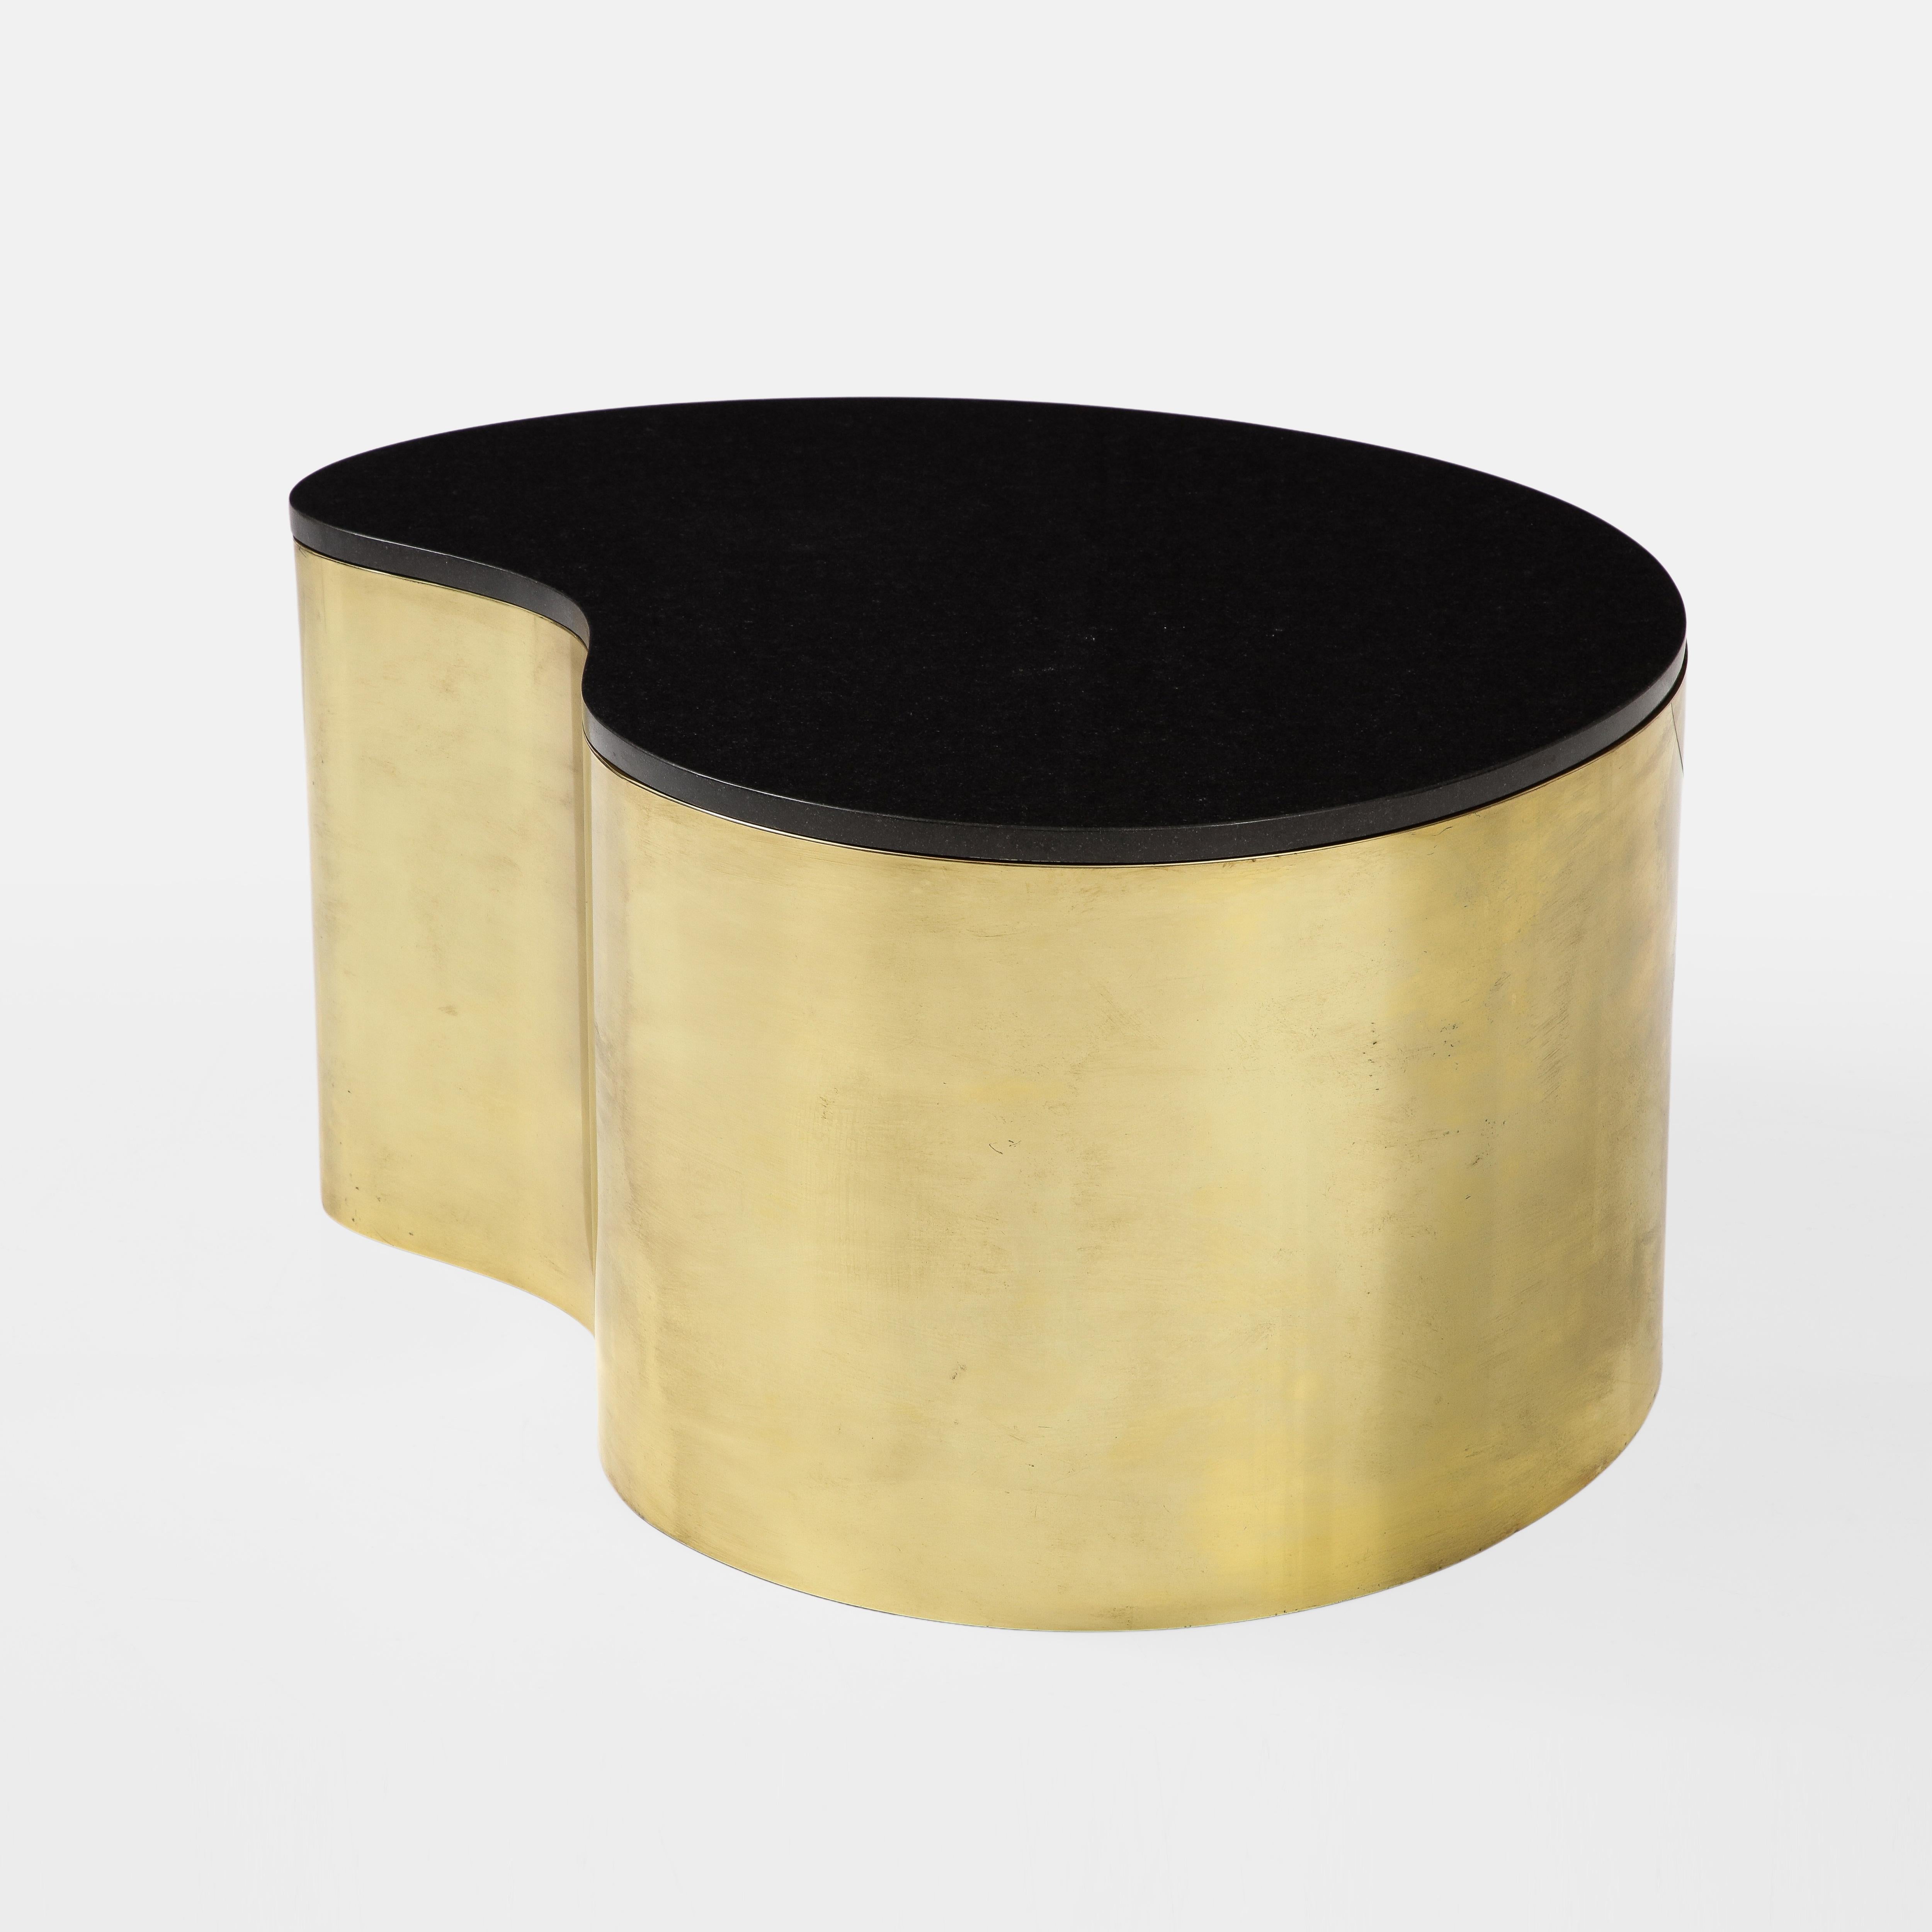 Karl Springer for Karl Springer LTD exceptional free-form coffee table with polished brass base and black granite top, designed circa 1970. This iconic Springer low table design has a unique amorphic shape with a seamlessly welded strip of brass